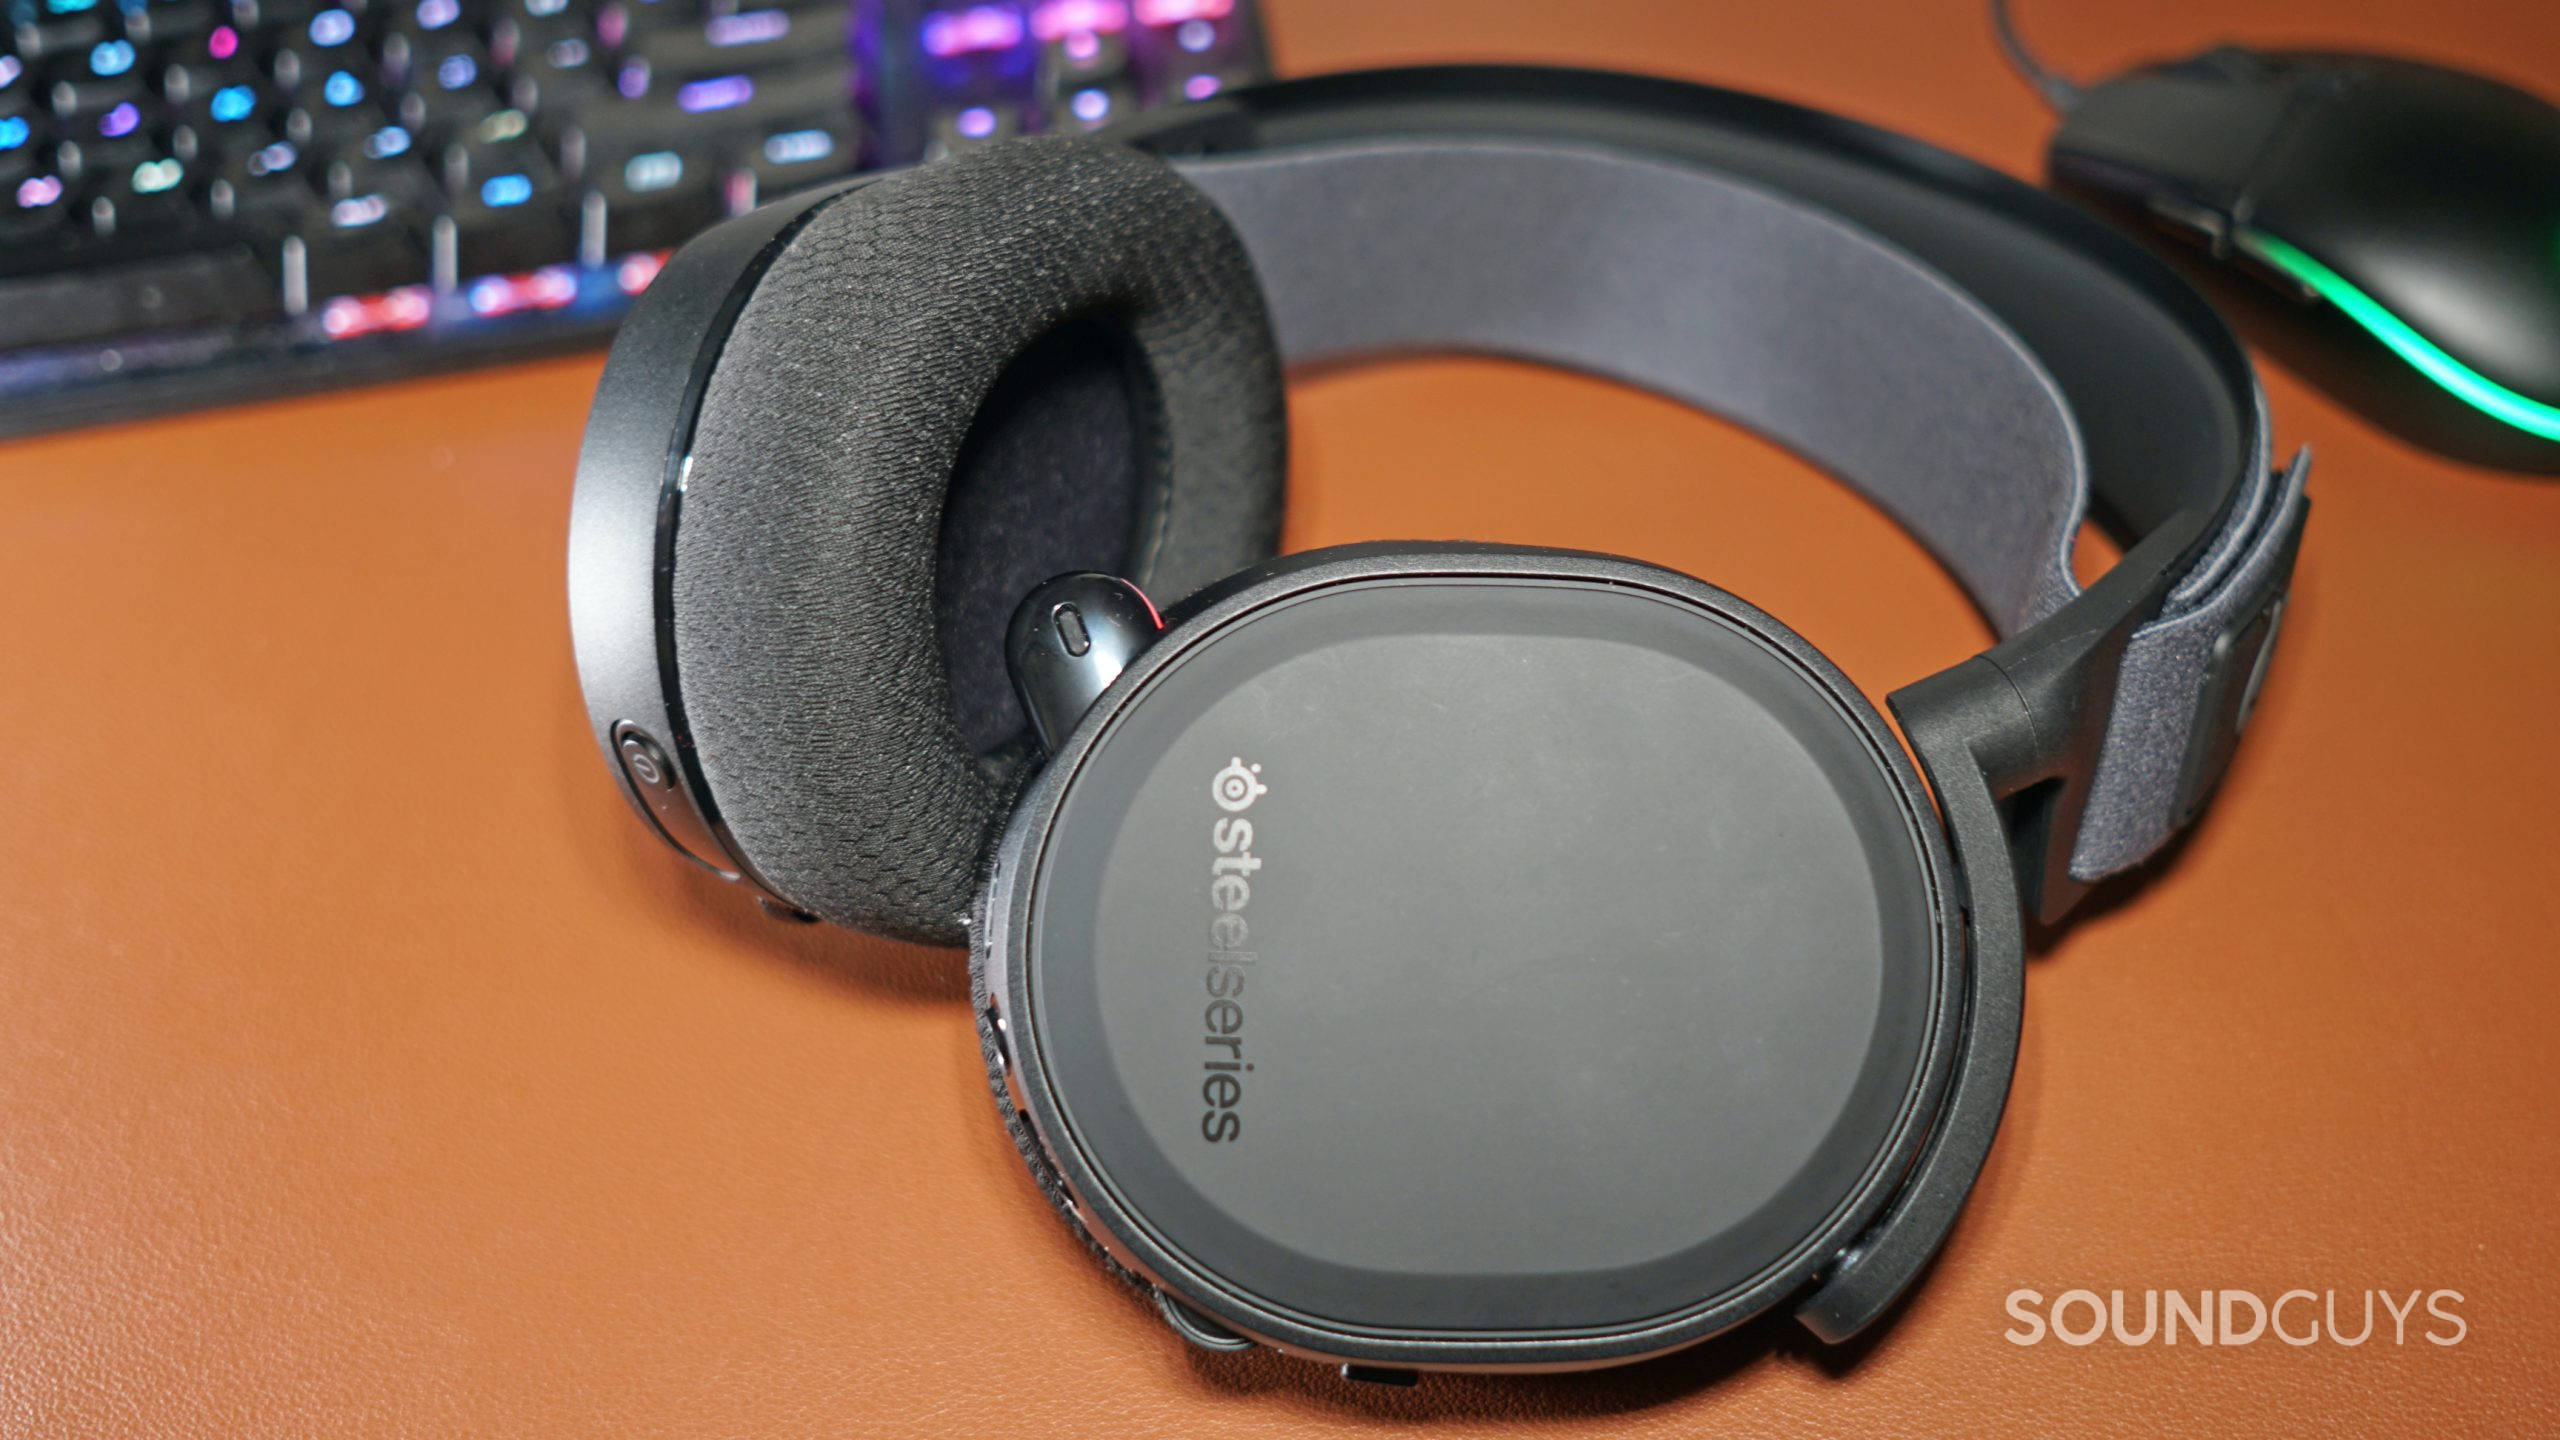 The SteelSeries Arctis 7+ lays on a leather desk mat in front of a HyperX mechanical gaming keyboard and a Logitech gaming mouse.